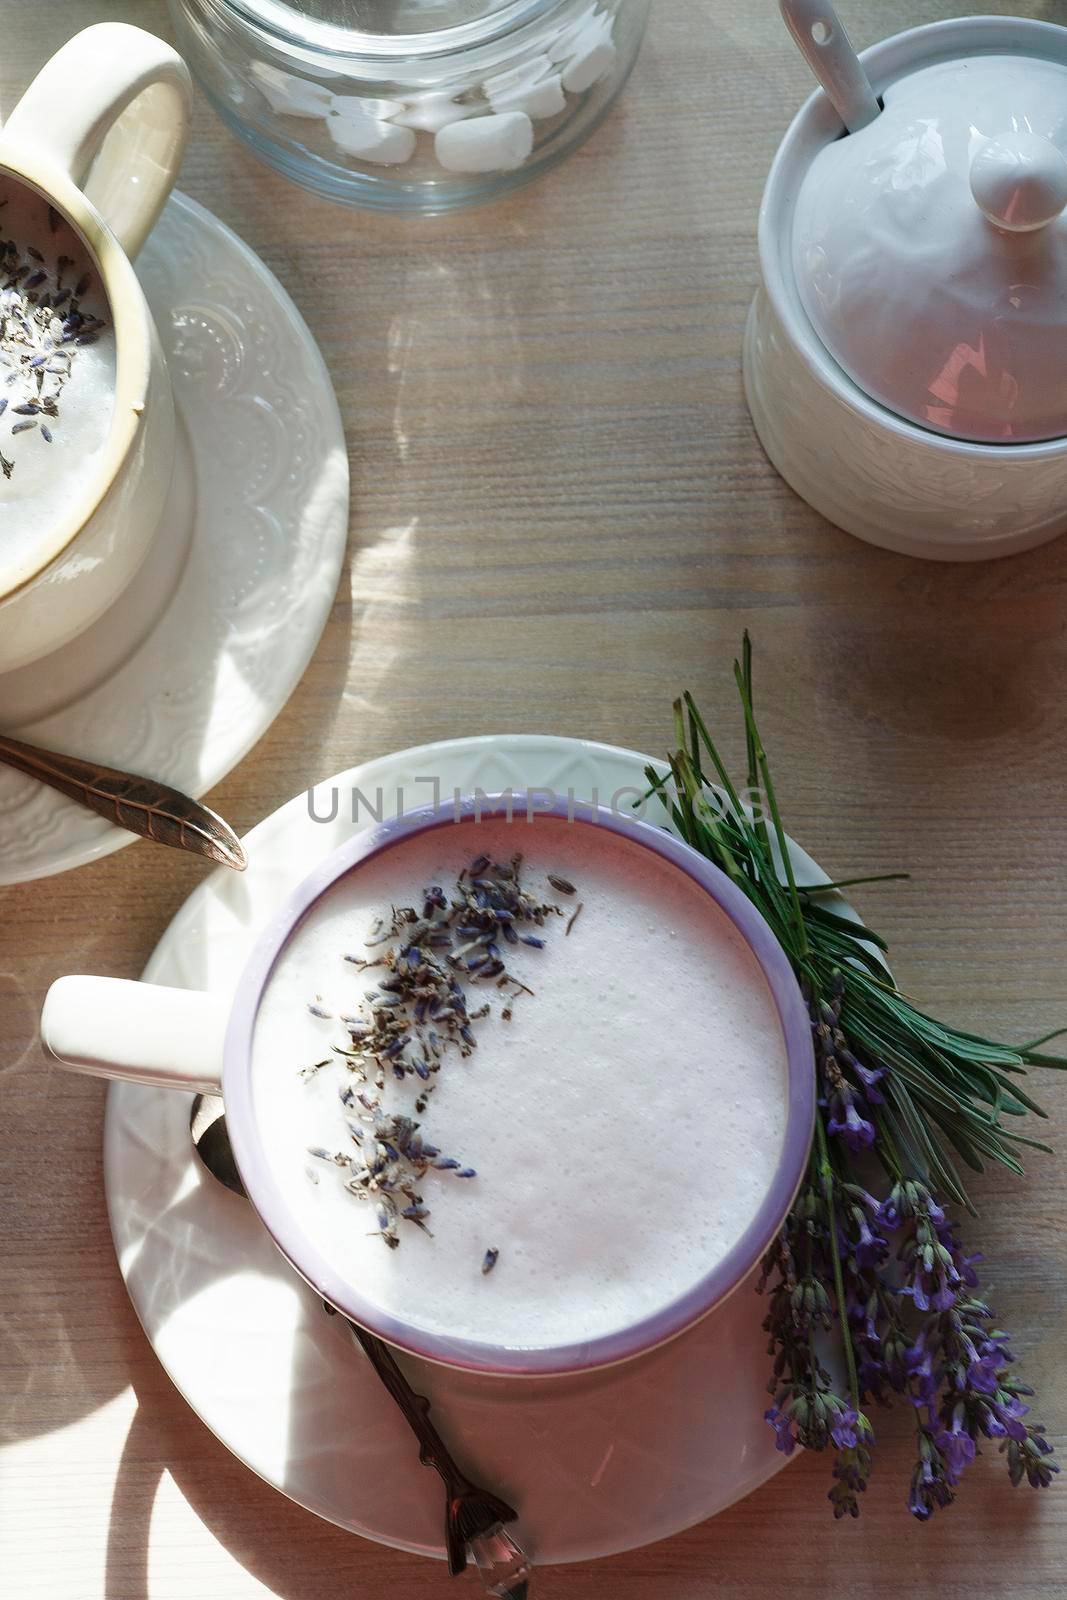 A cup of home made earl grey tea latte drink with lavender flower buds in white cups with fresh lavanda flowers on white table, good morning concept, selective focus., flat lay.